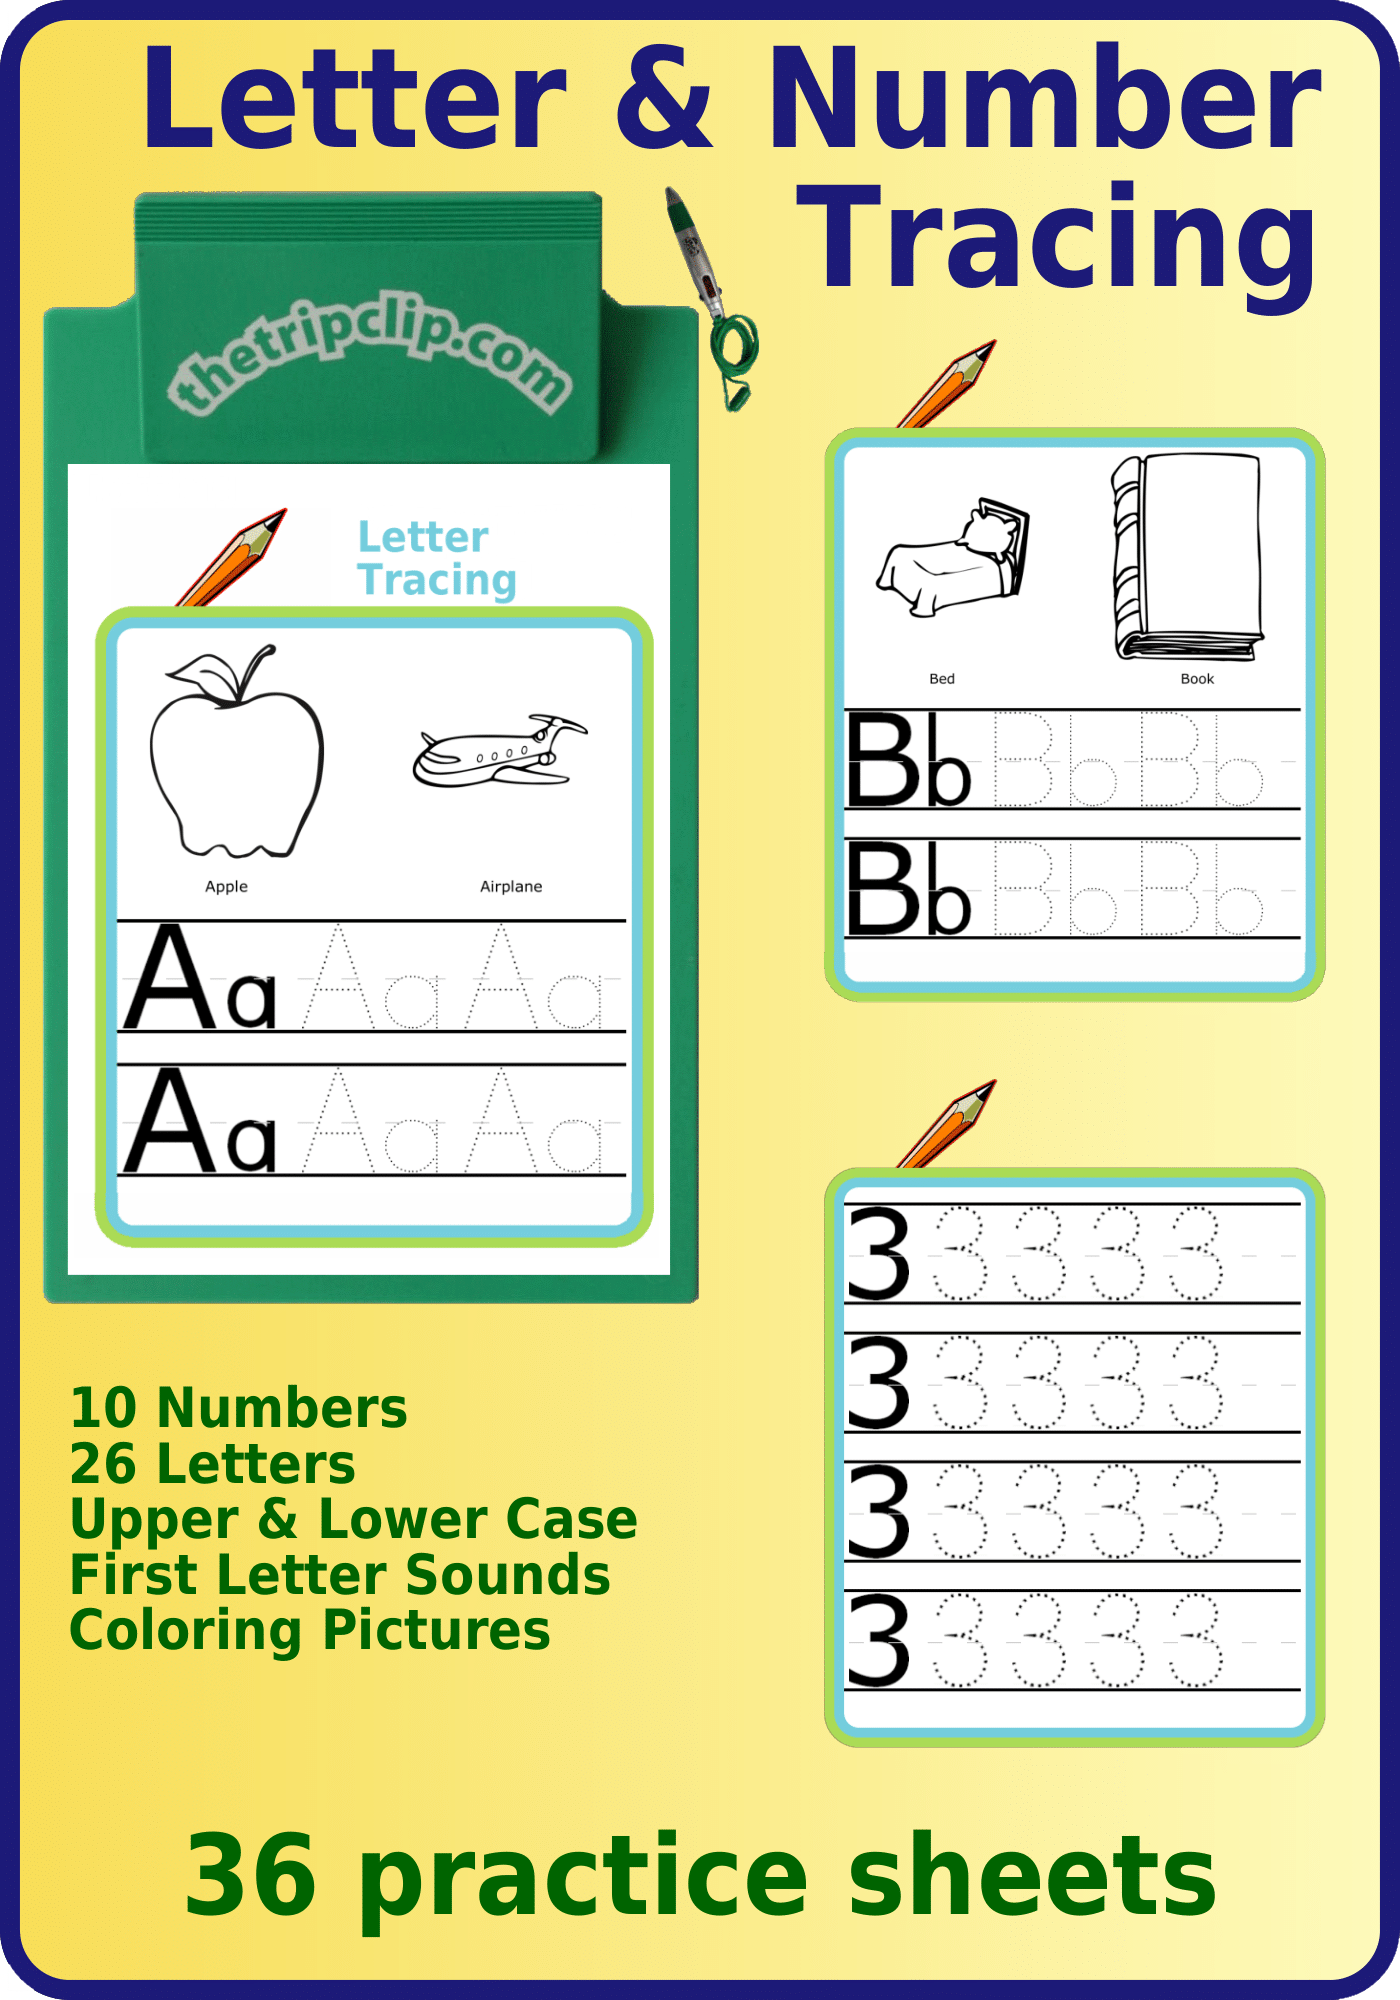 Letter and number tracing practice sheets